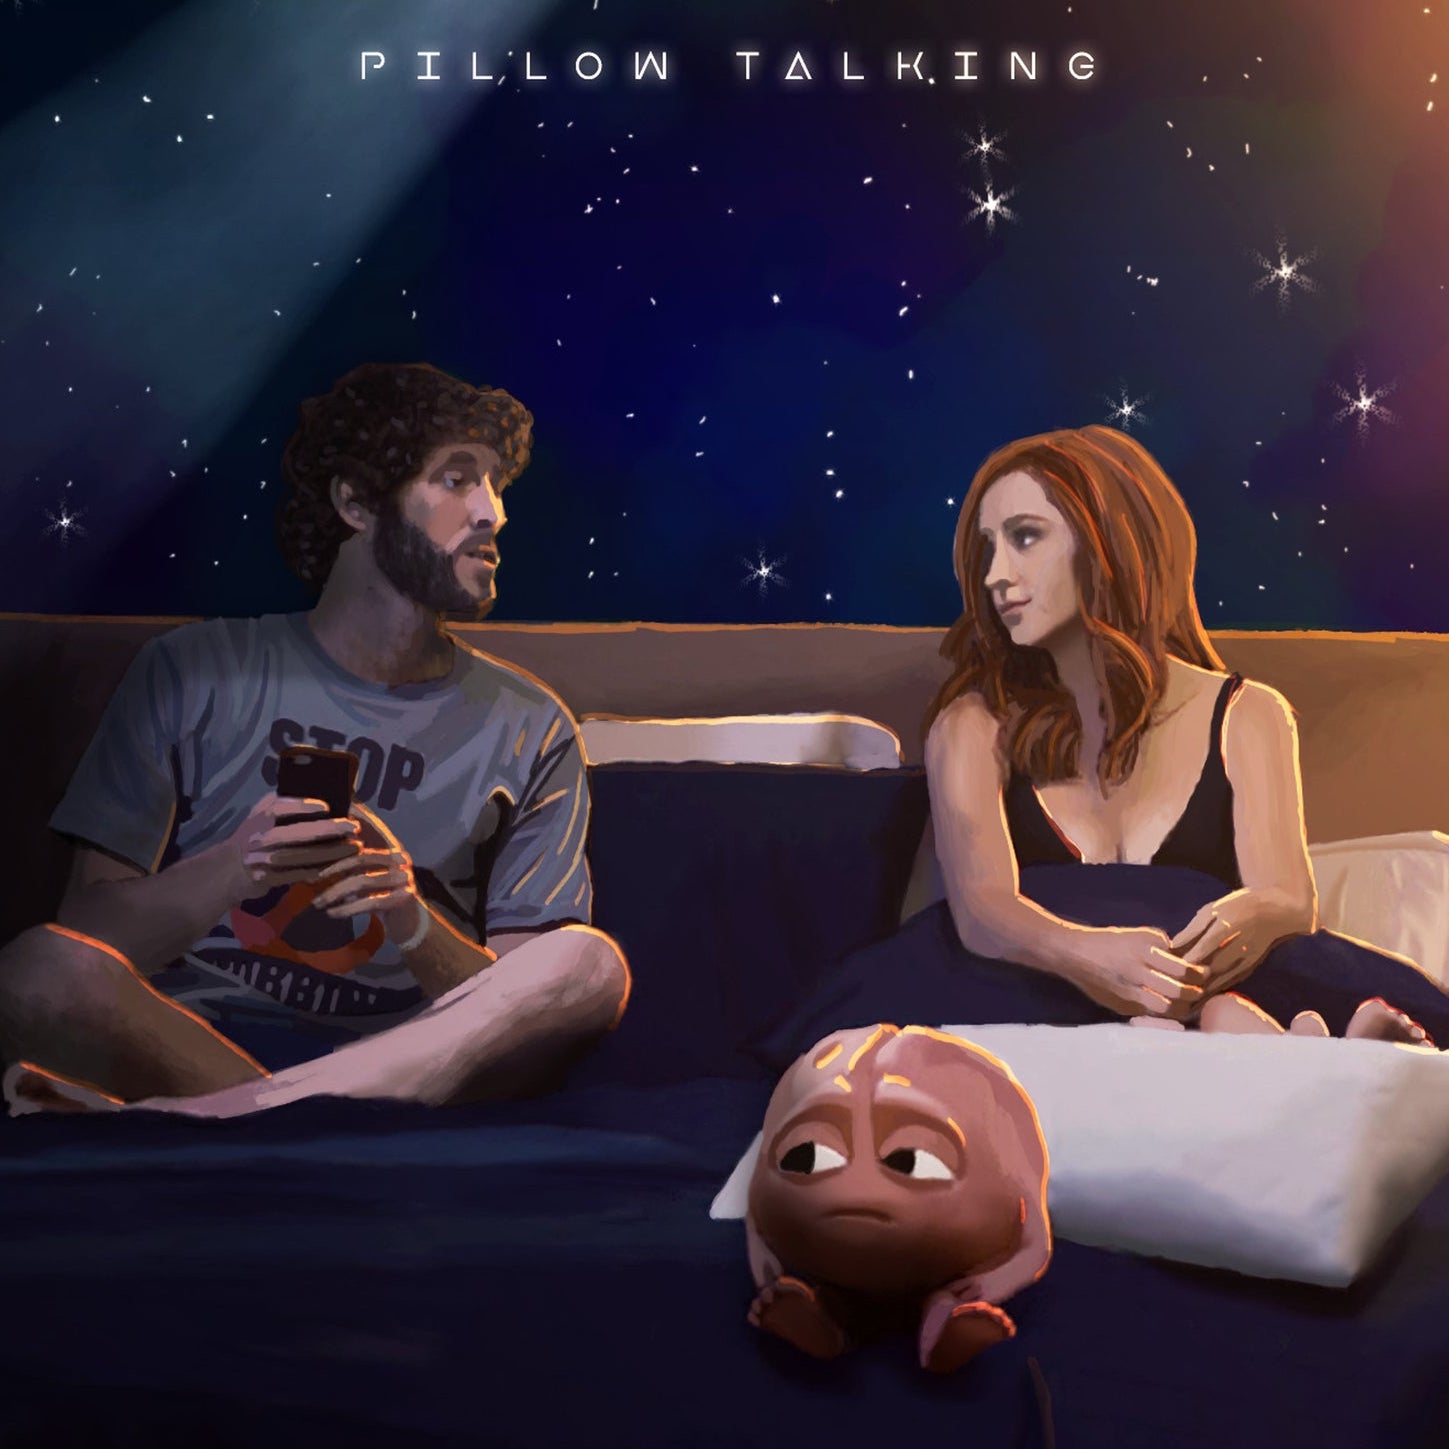 Taylor also starred in pillow talking alongside dave burd (lil dicky) and j...